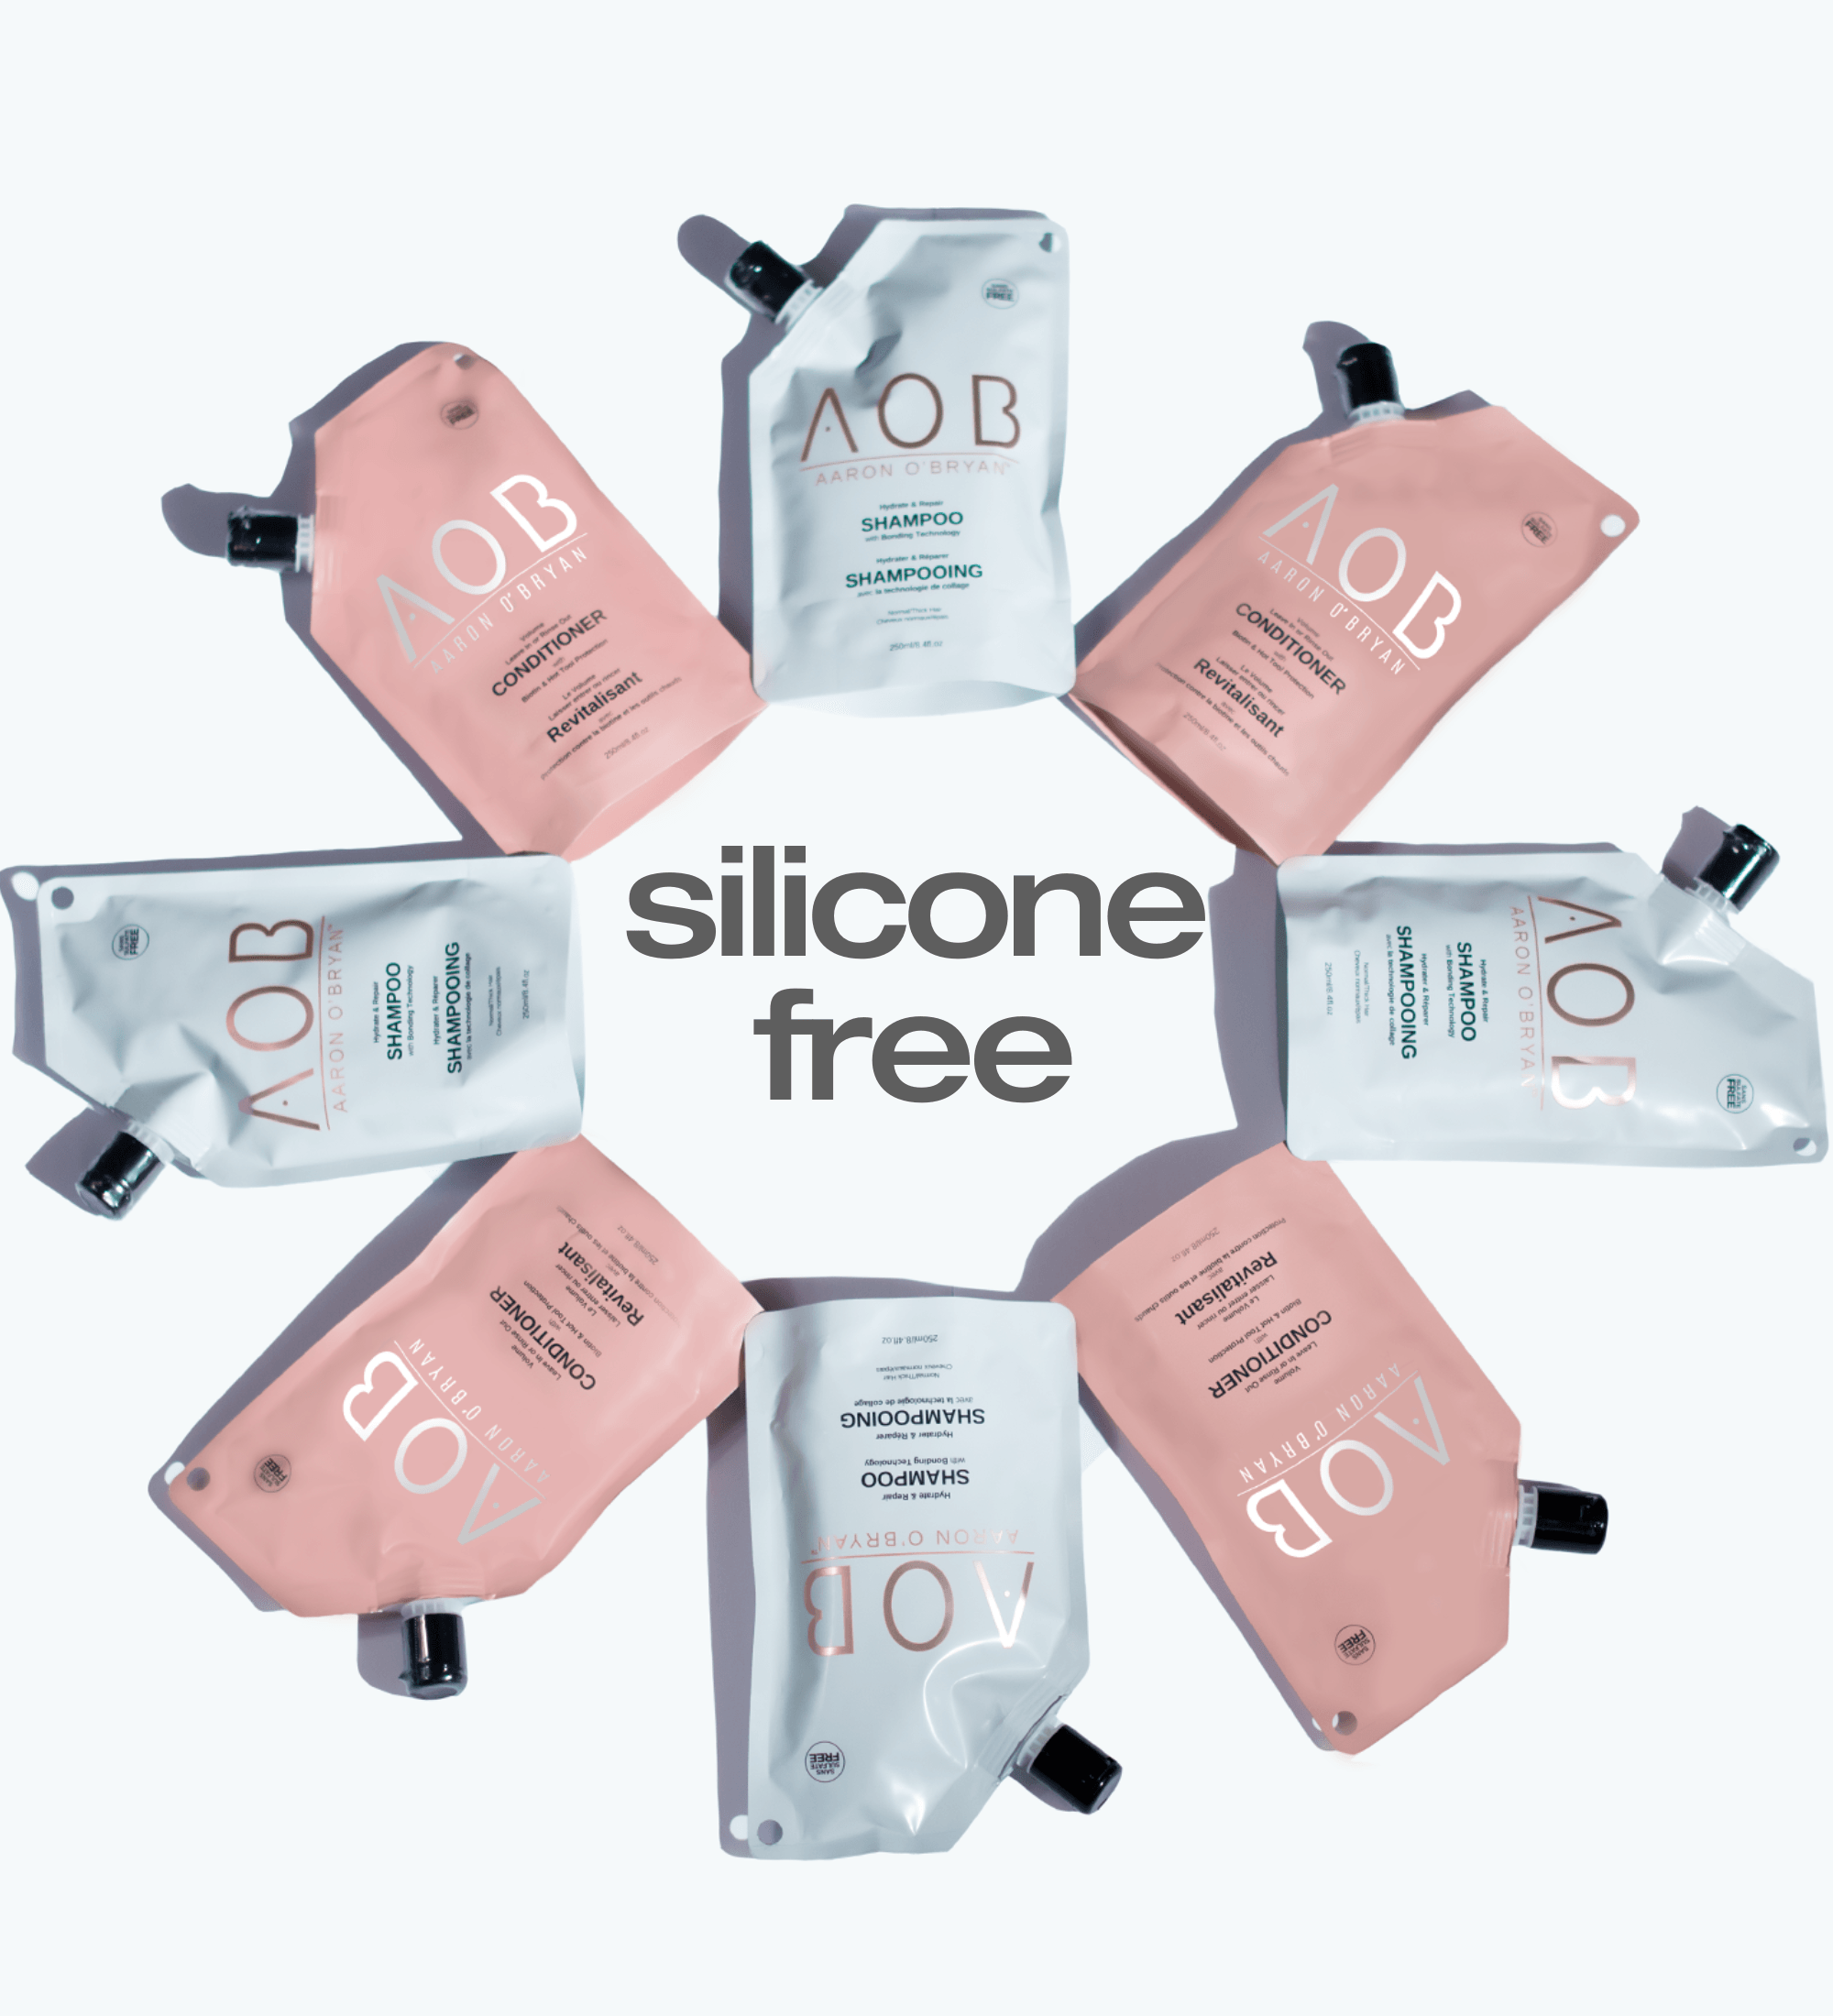 AOB Shampoo & Conditioner Pouches laid flat in a circle with "Silicone Free" text in the middle